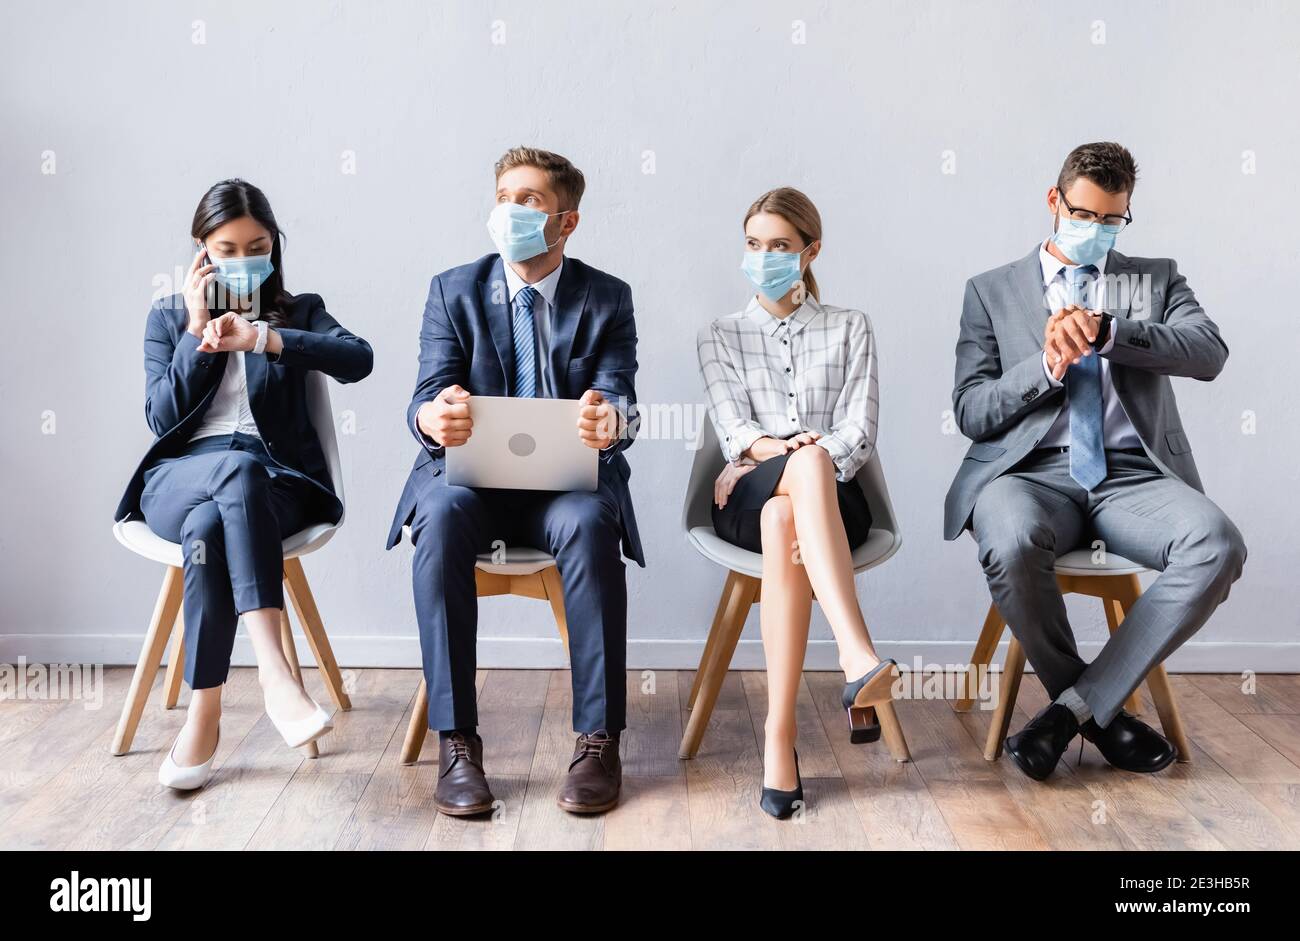 Multicultural people in medical masks with laptop and smartphone waiting on chairs in hall Stock Photo